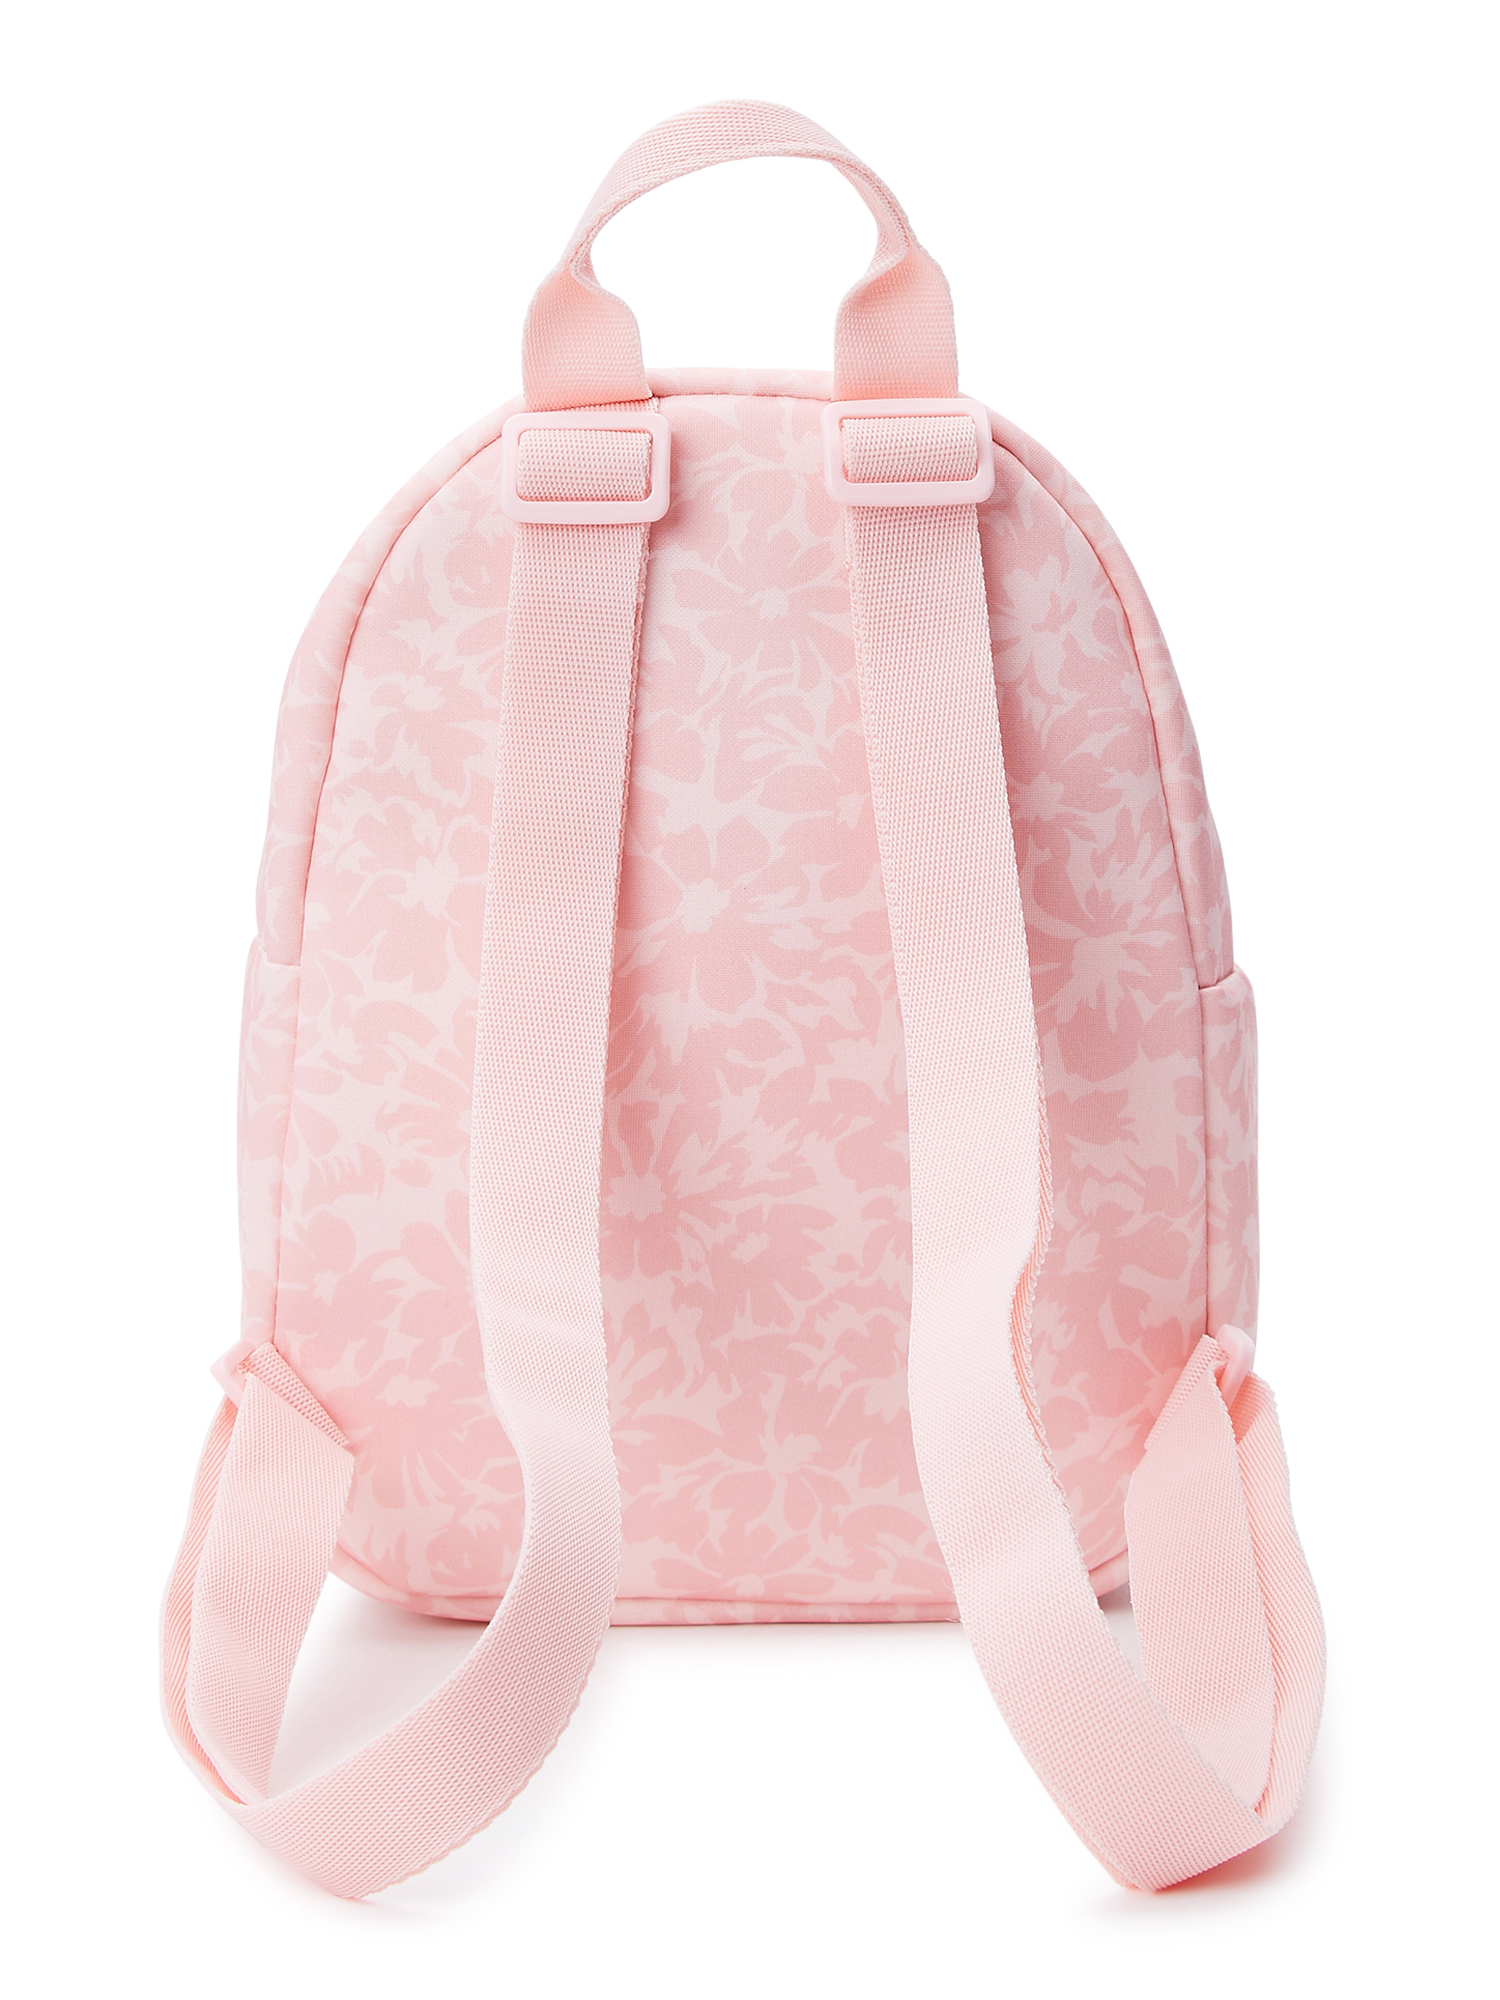 Reebok Women’s Molly Mini Backpack, Rose Daisies - image 3 of 5